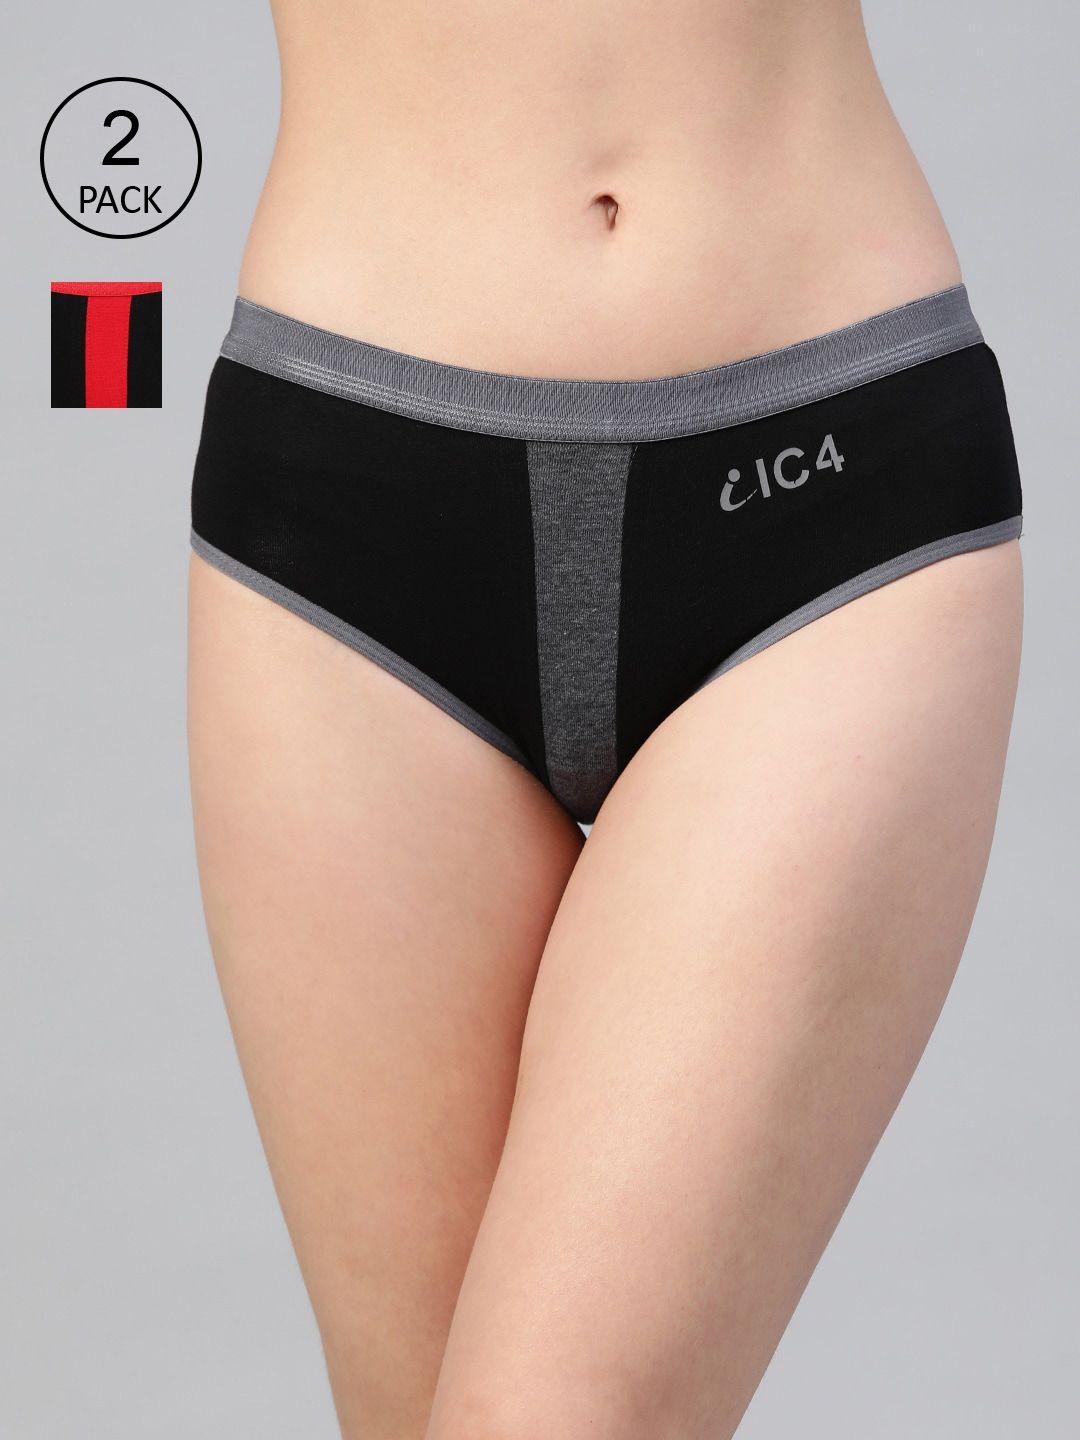 ic4-women-pack-of-2-charcoal-&-red-striped-basic-briefs